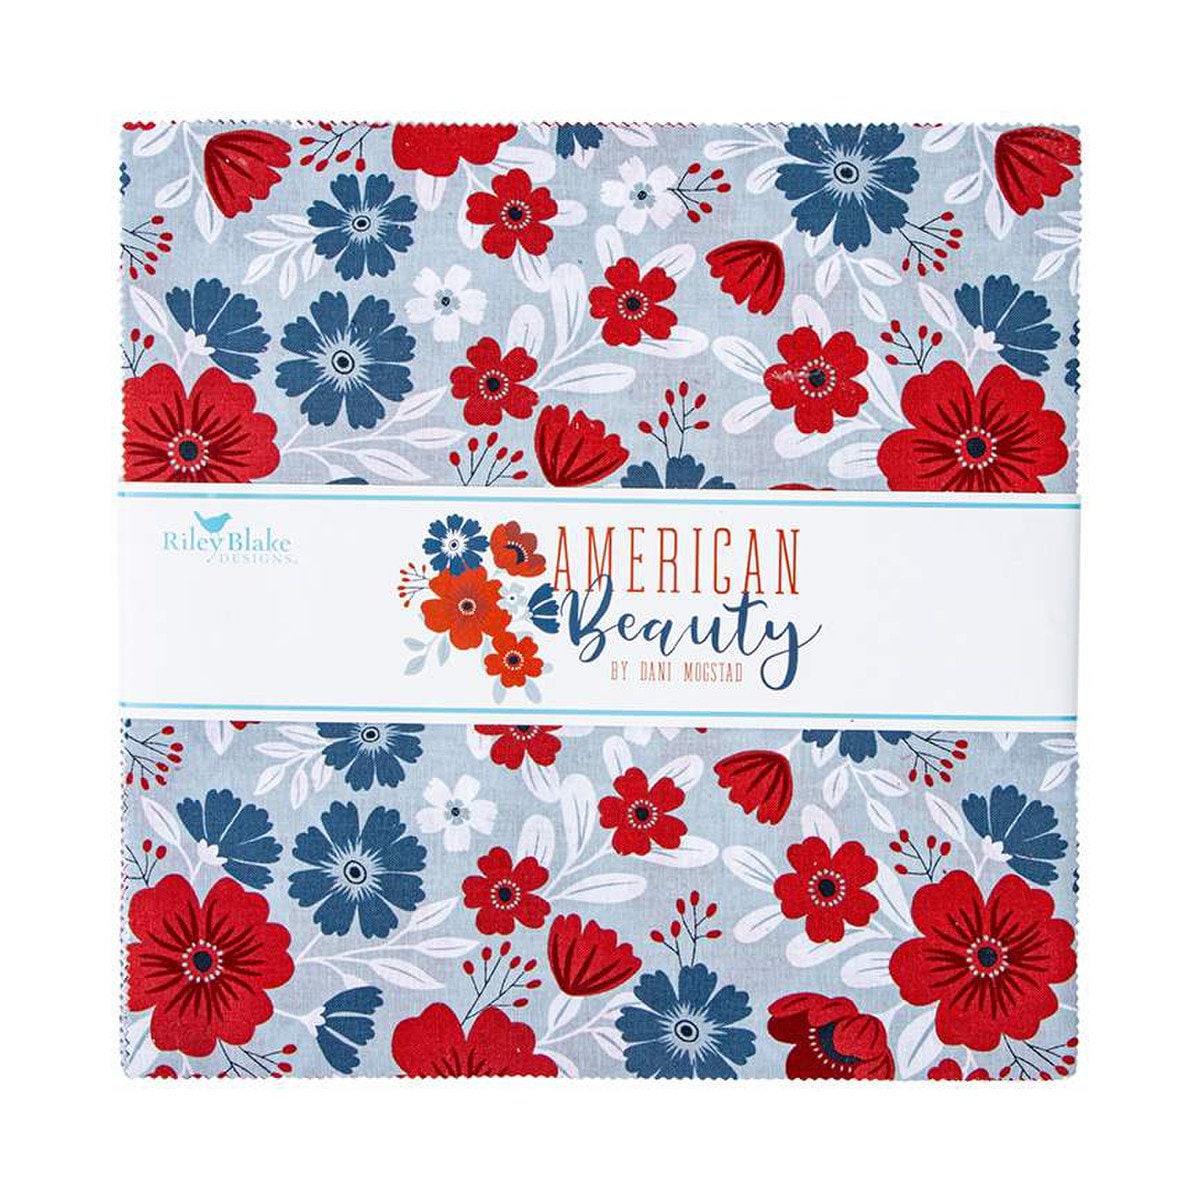 American Beauty 10" Stacker Layer Cake - Riley Blake Designs 10-14440-42, Patriotic Floral Fabric Layer Cake, Red White & Blue Layer Cake